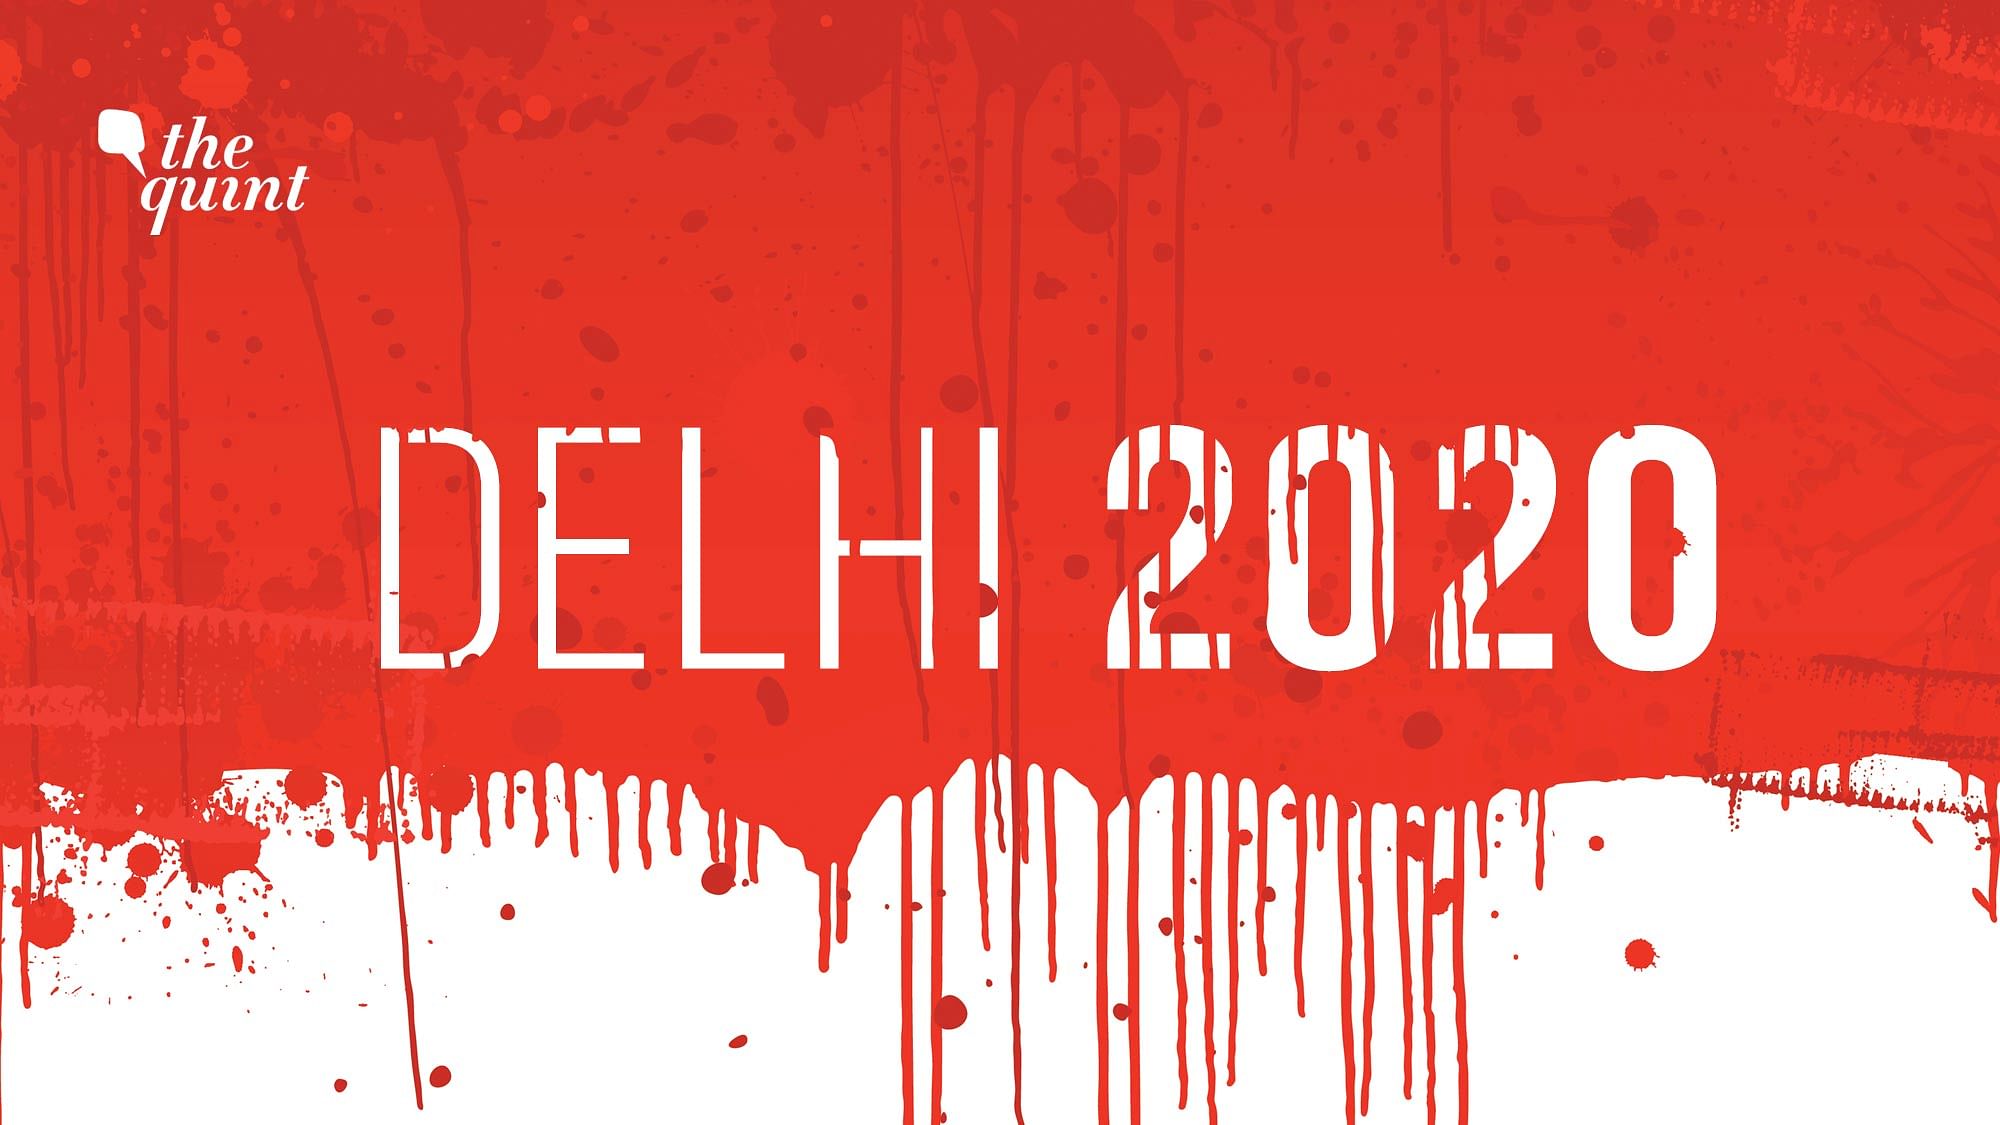 Delhi Violence: With every drop of blood shed in Delhi our hands are getting smellier and bloodier.